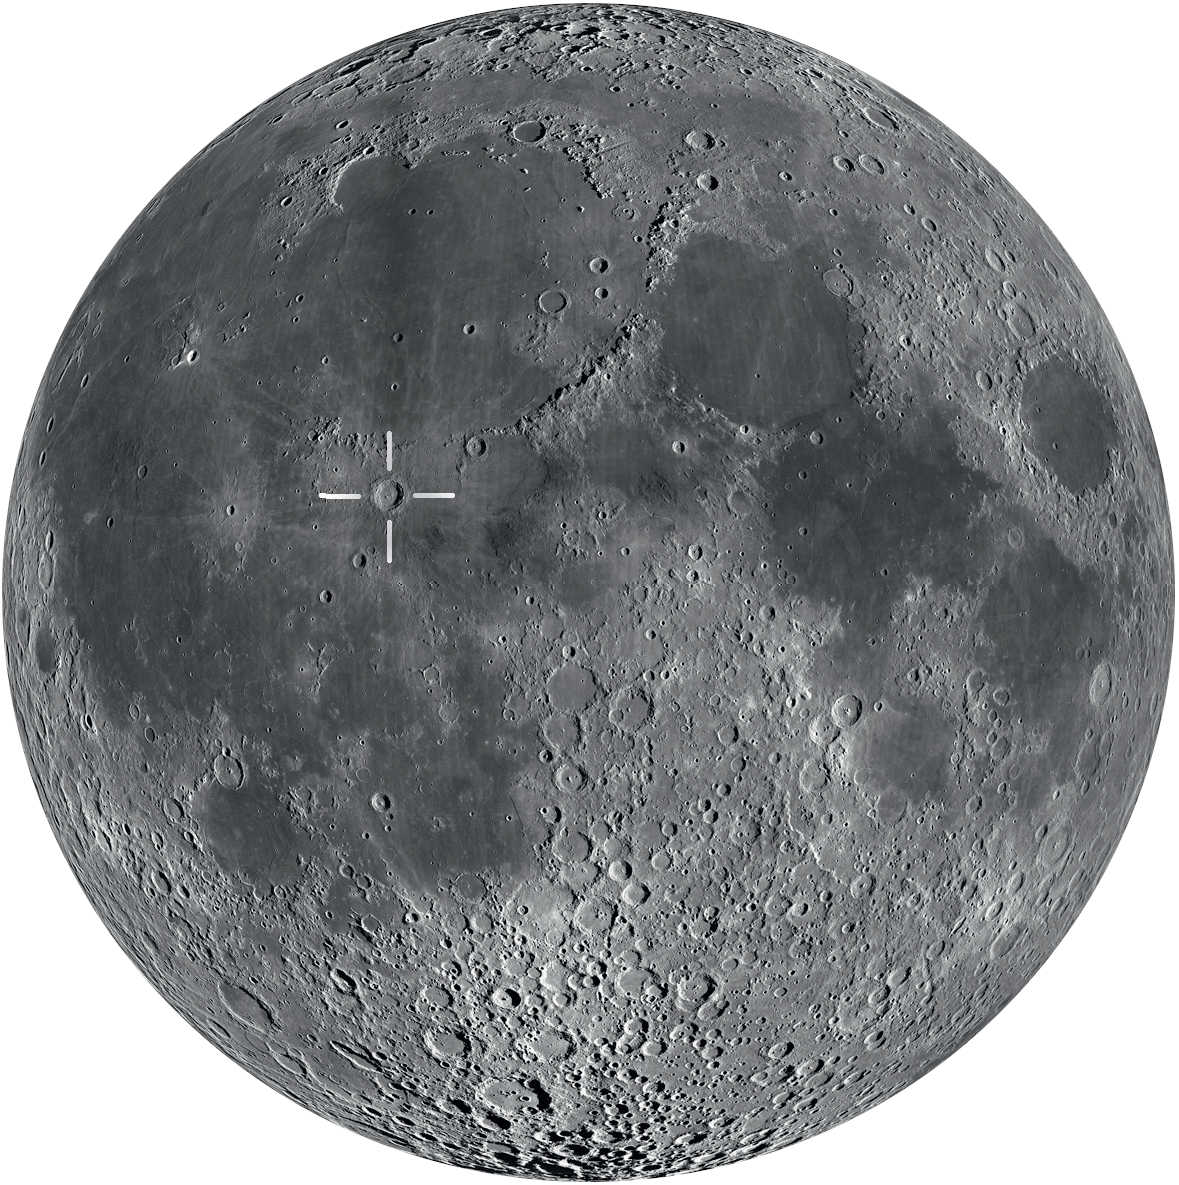 Copernicus is located near the centre of the Moon. It’s best observed from just after the first quarter through to just before the full Moon.